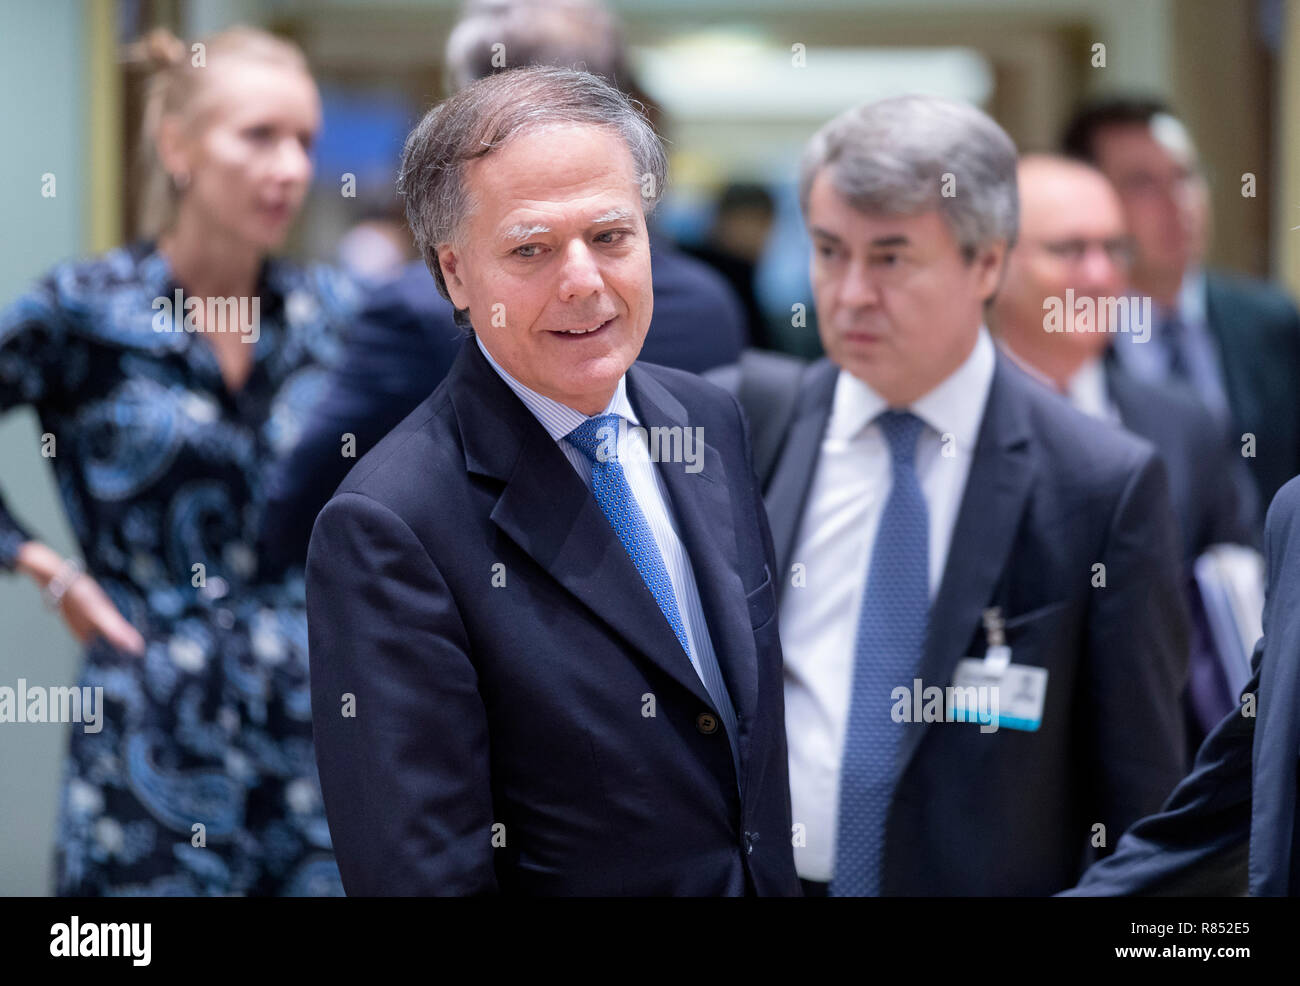 Belgium, Brussels, on 2018/09/18: Enzo Moavero Milanesi, Italian Minister of Foreign Affairs *** Local Caption *** Stock Photo